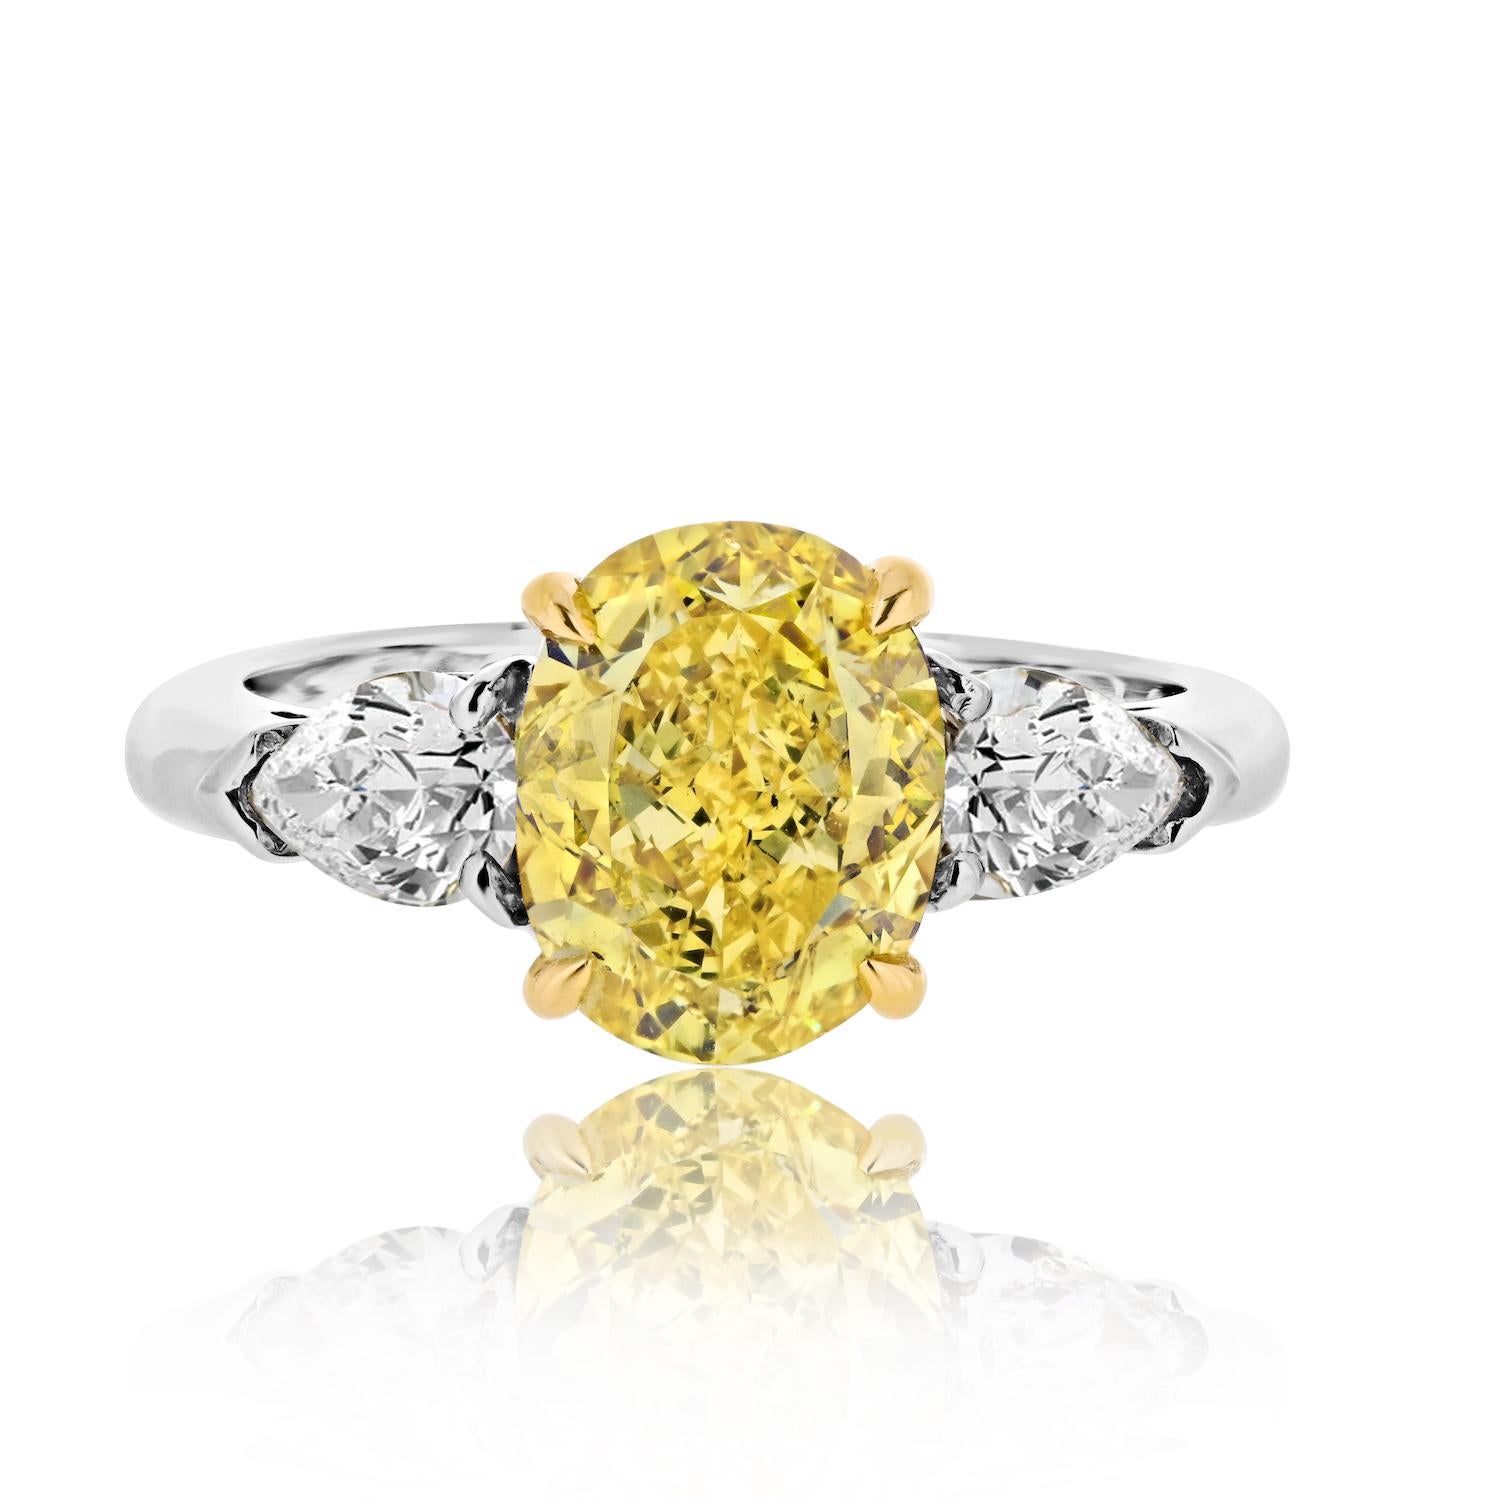 Embrace a vision of radiant elegance with this exquisite 2.53ct Fancy Vivid Yellow Oval Cut Three Stone Diamond Engagement Ring. 

The centerpiece, a resplendent 2.53ct oval cut diamond, captivates with its Fancy Vivid Yellow hue, held in place with